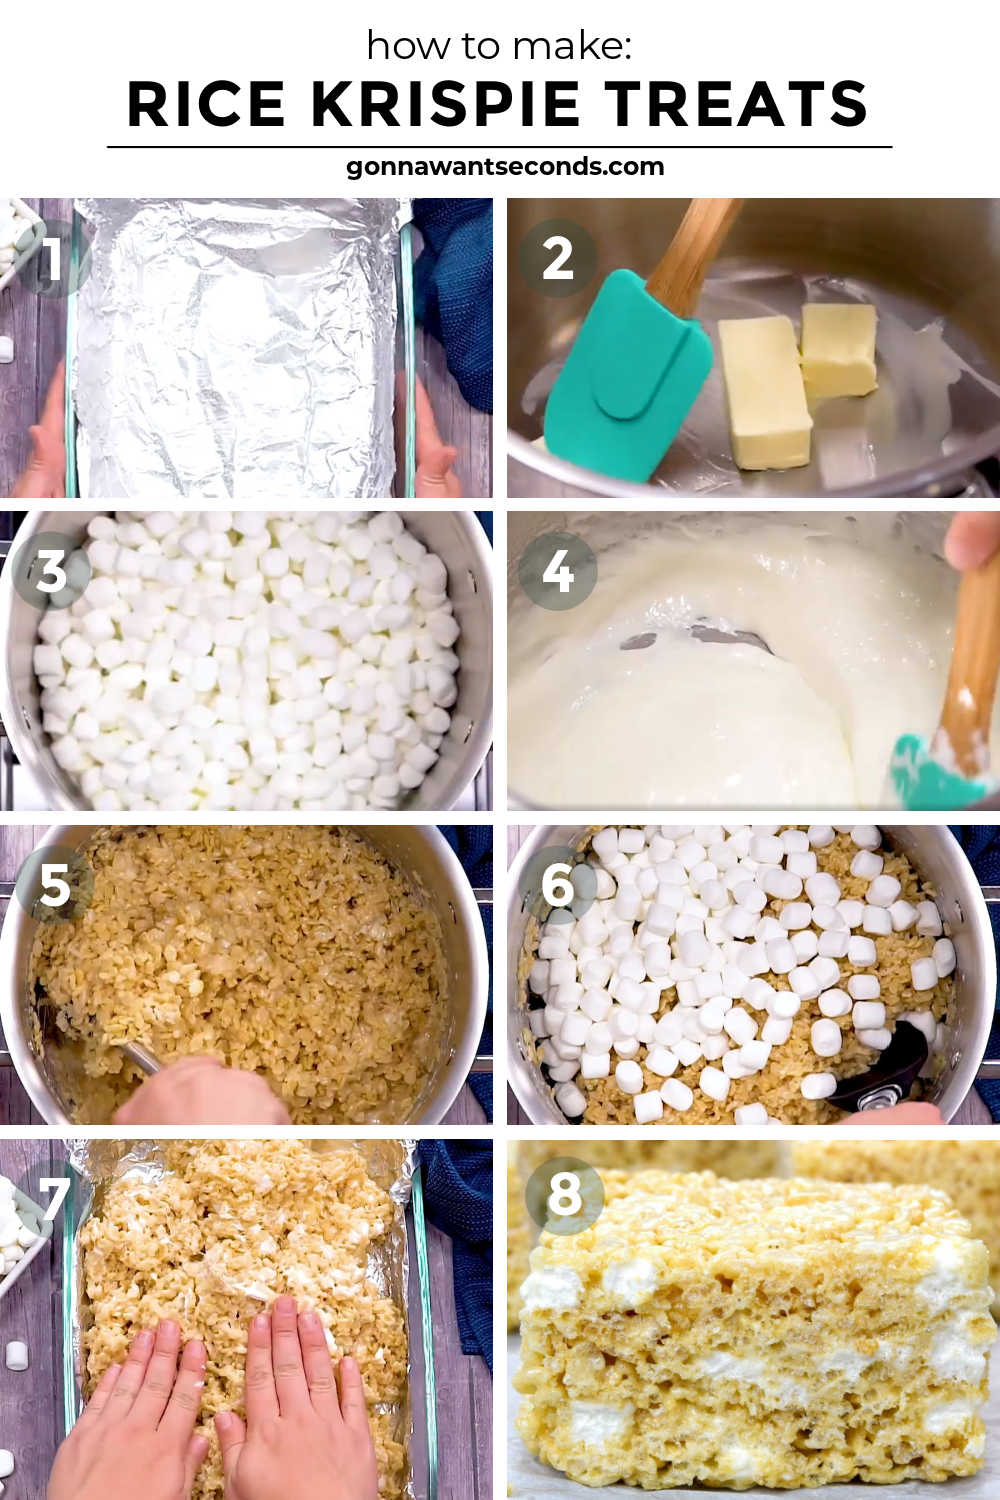 Step by step how to make rice krispie treats